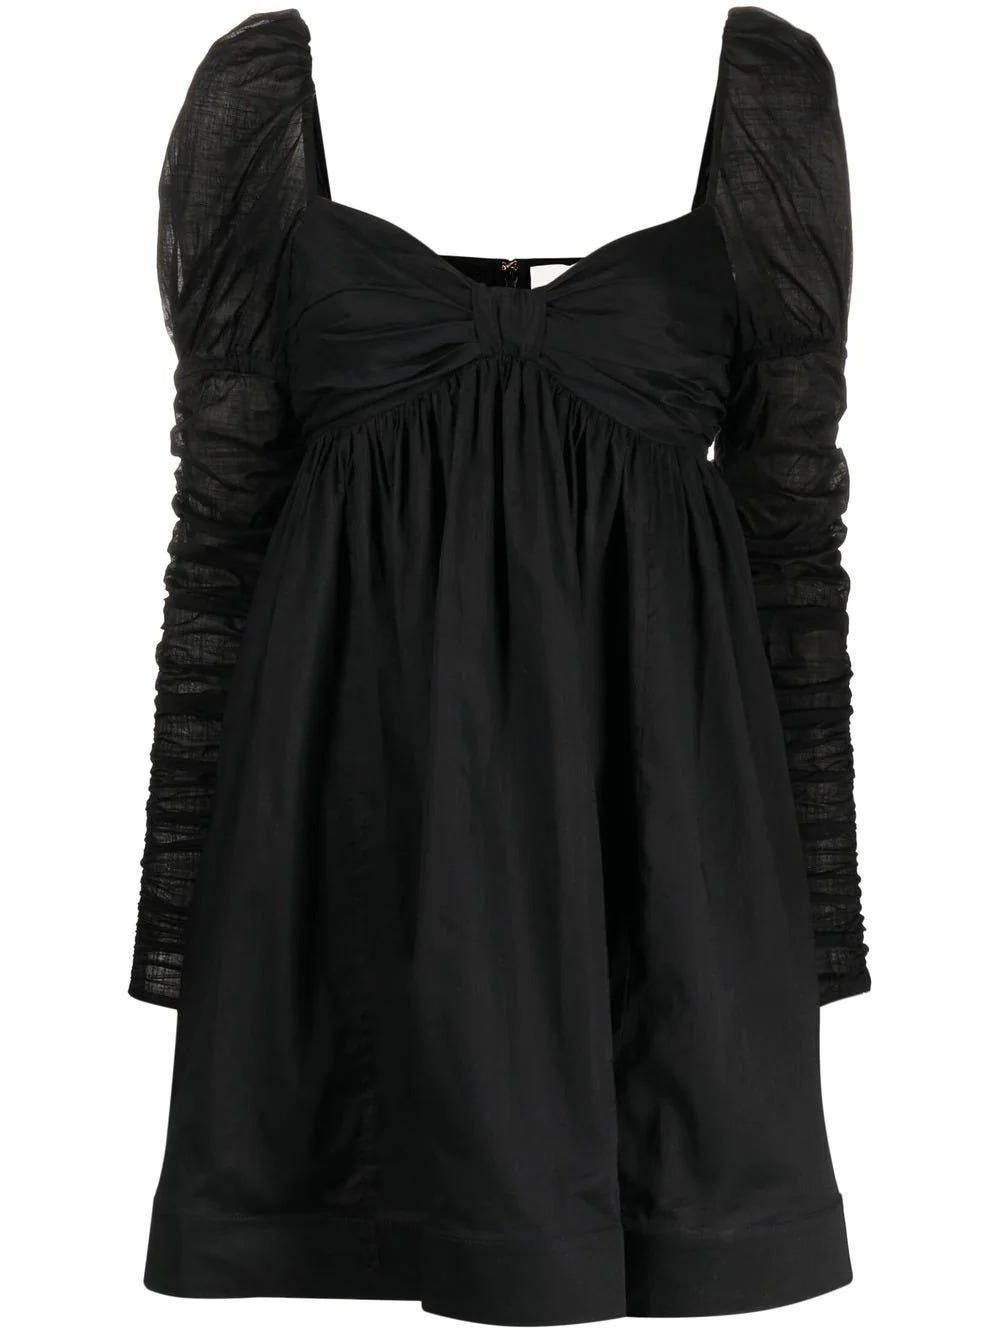 ZIMMERMANN VIOLET SHORT BLACK DRESS WITH LONG GATHERED SLEEVES